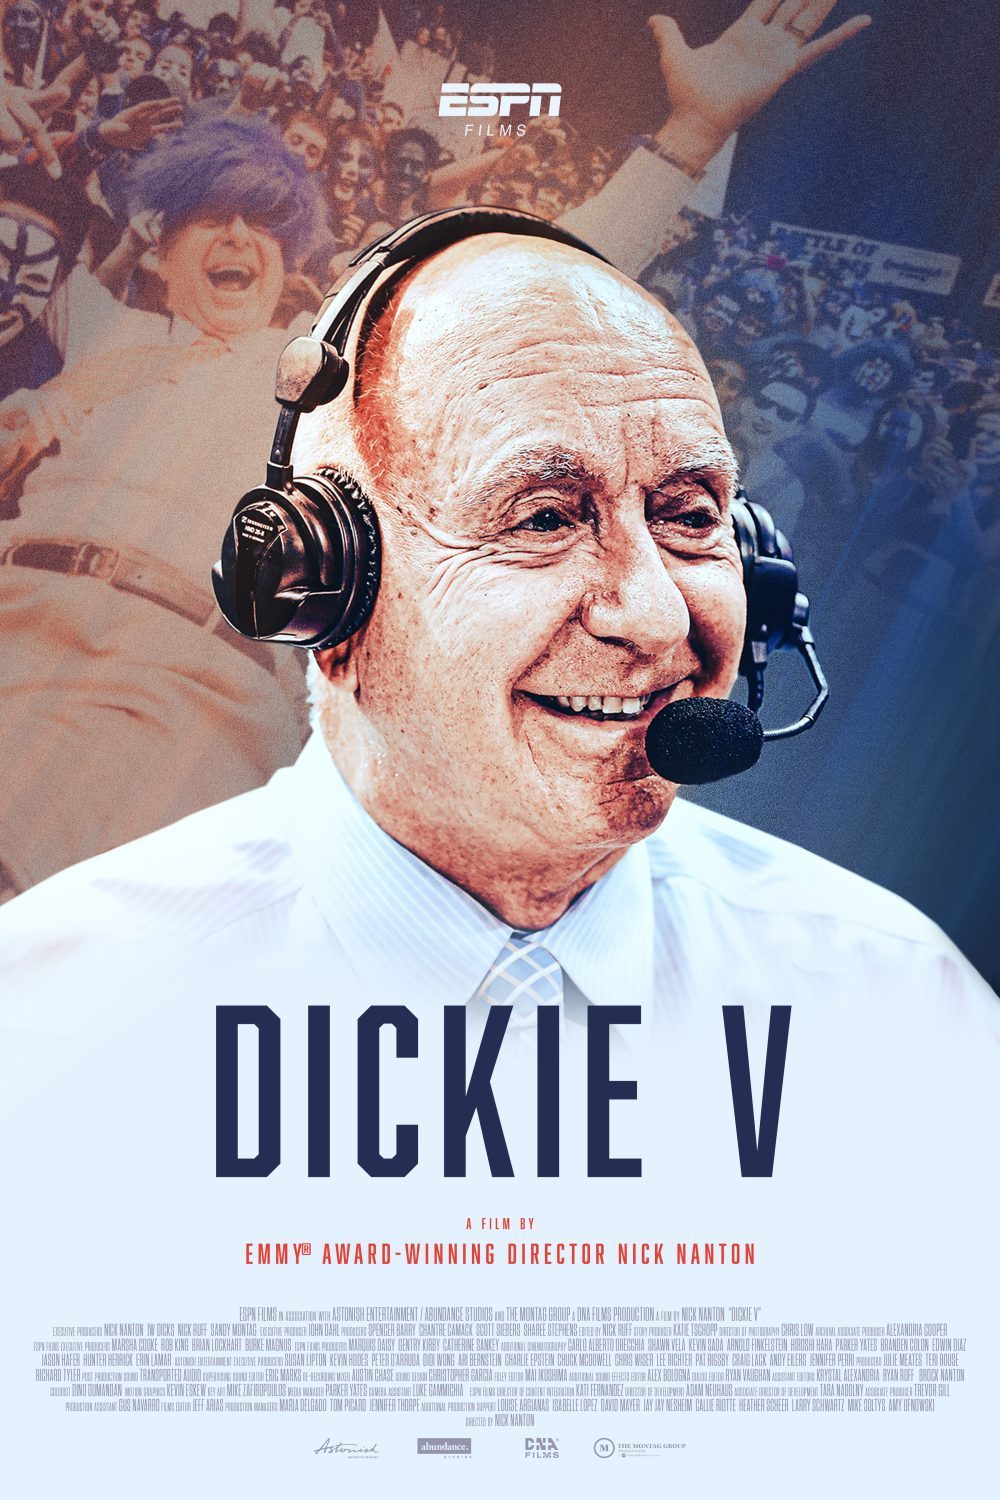 ESPN Announces New Documentary About Dick Vitale Will Debut This Month